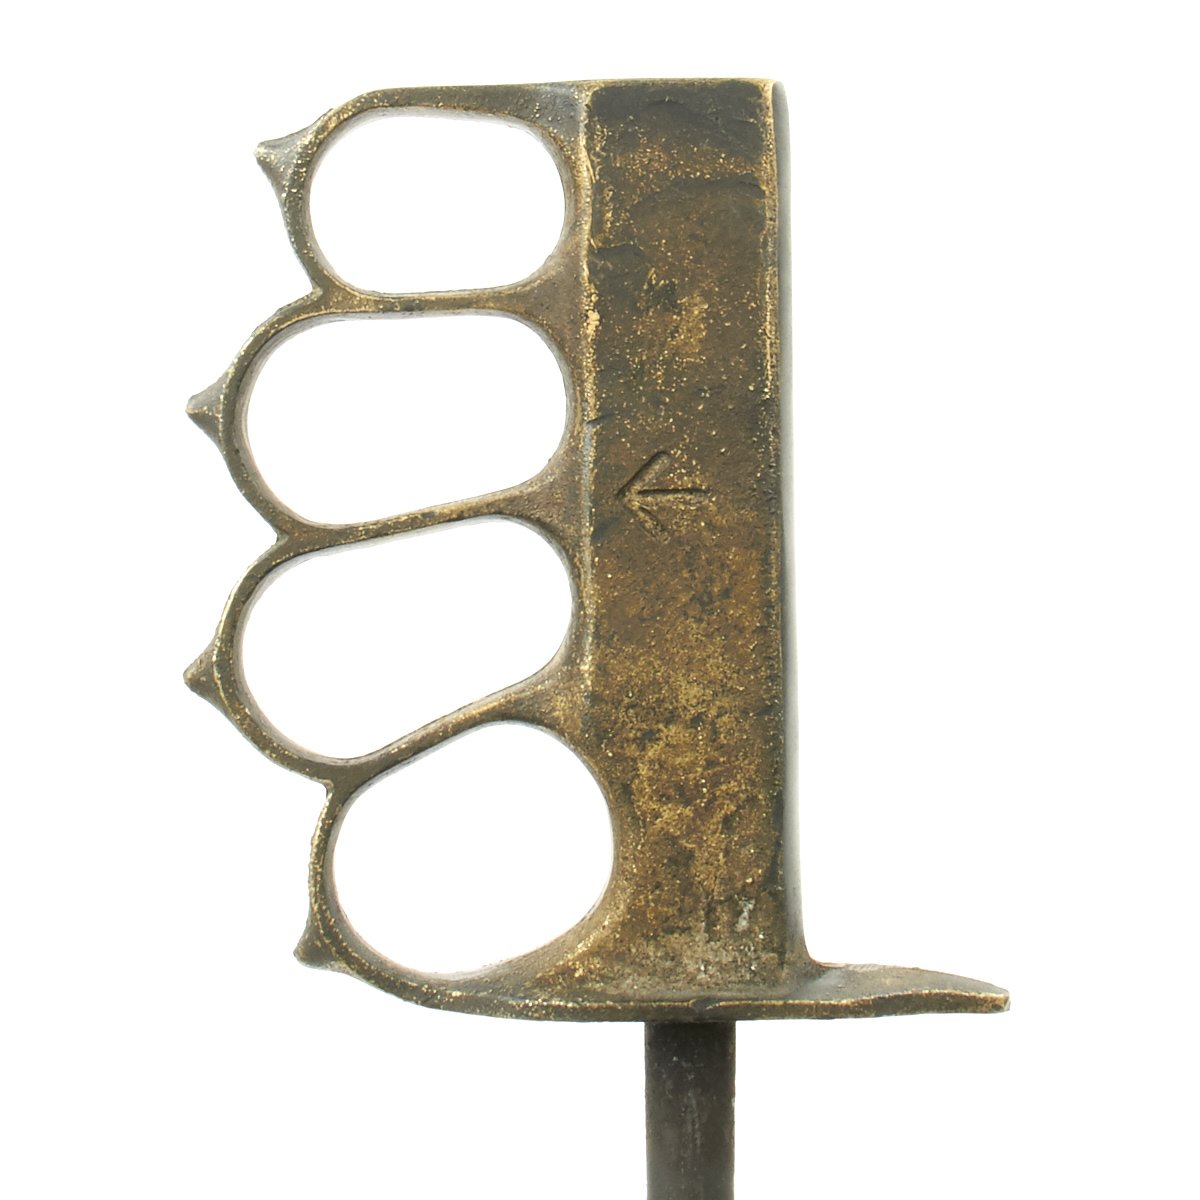 Original British WWII Custom Brass Knuckle Duster Trench Spike Knife –  International Military Antiques